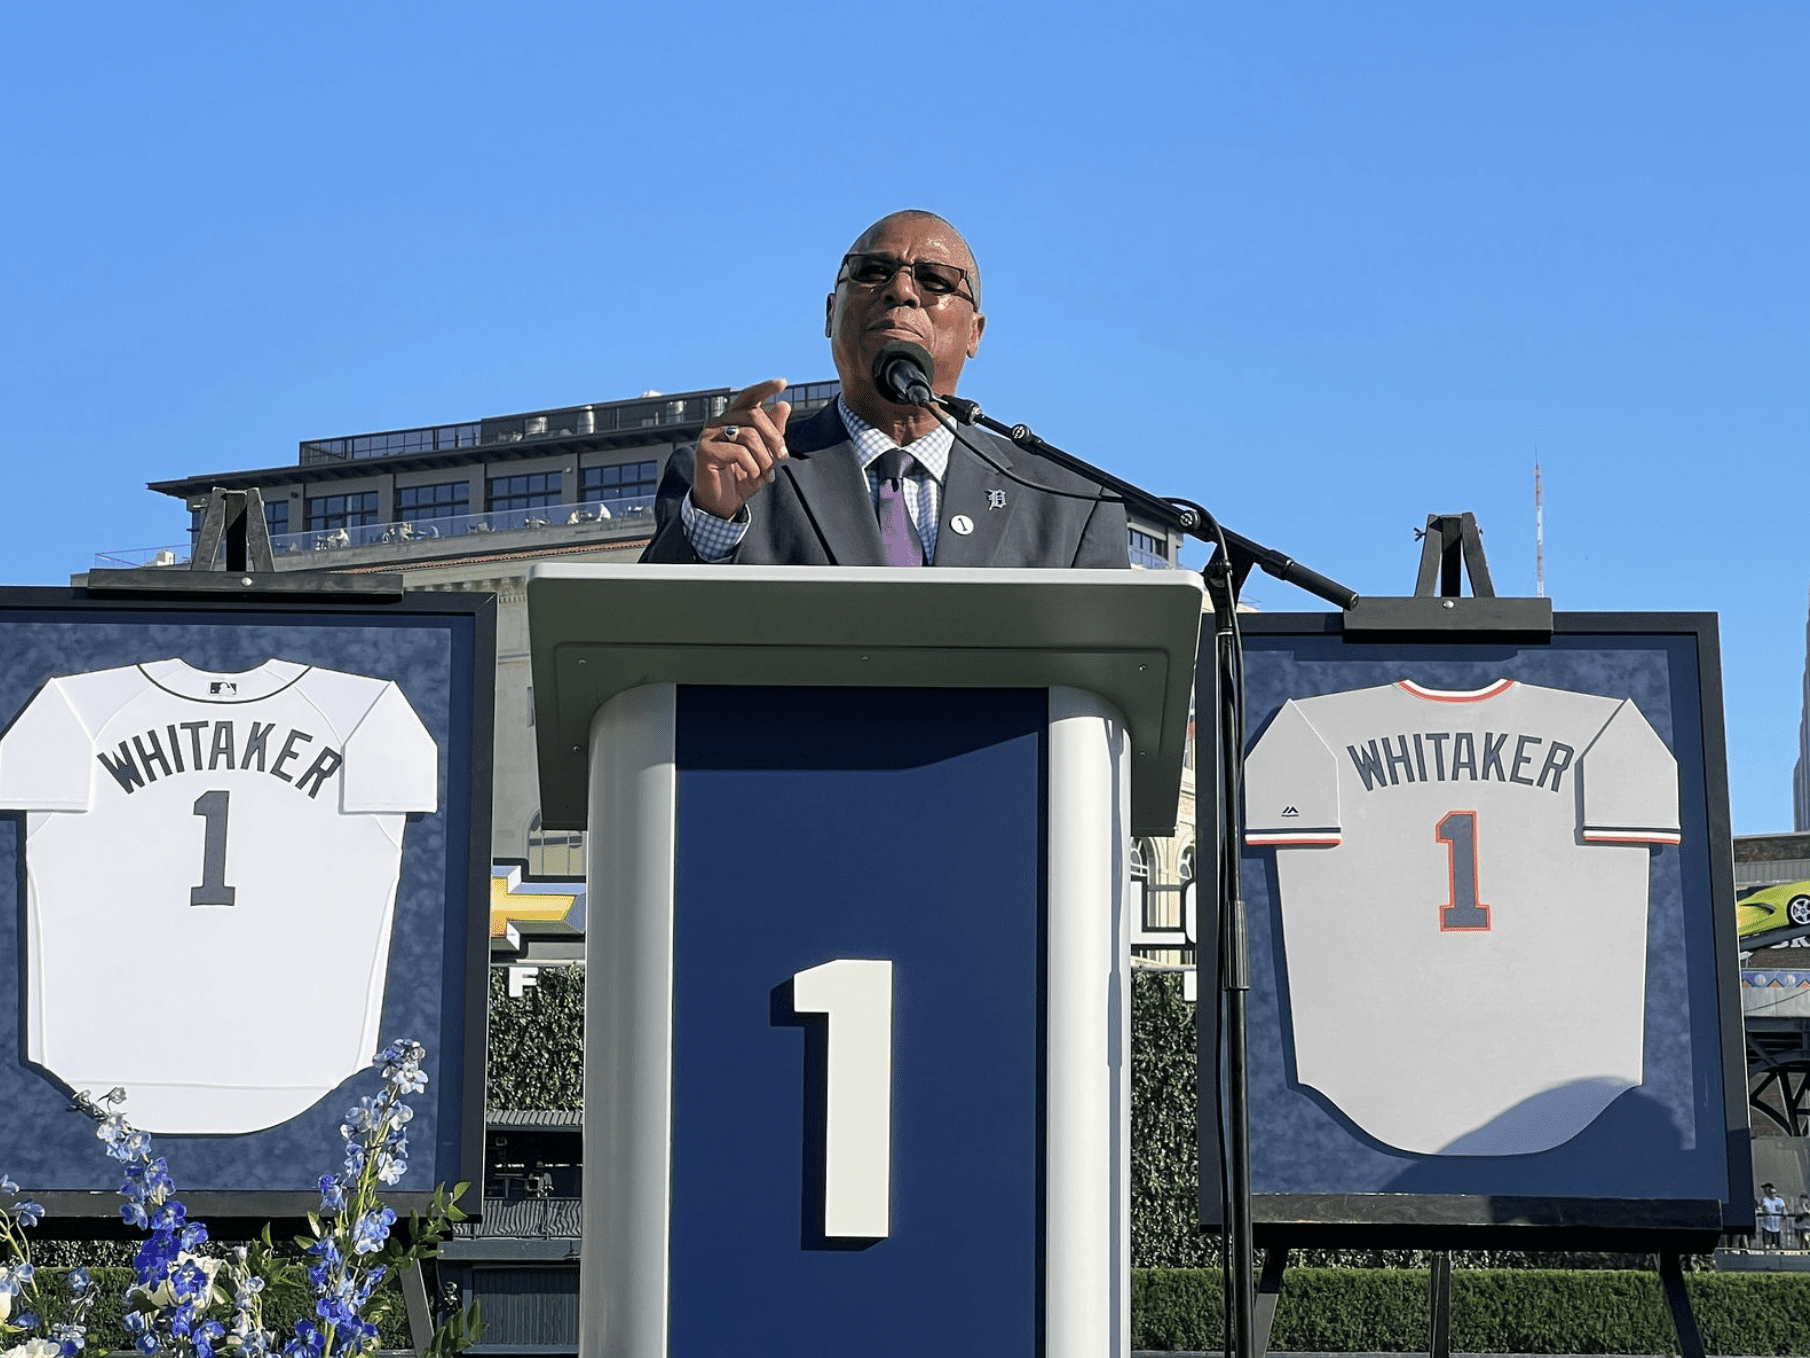 Detroit Tigers former player Lou Whitaker to have number retired